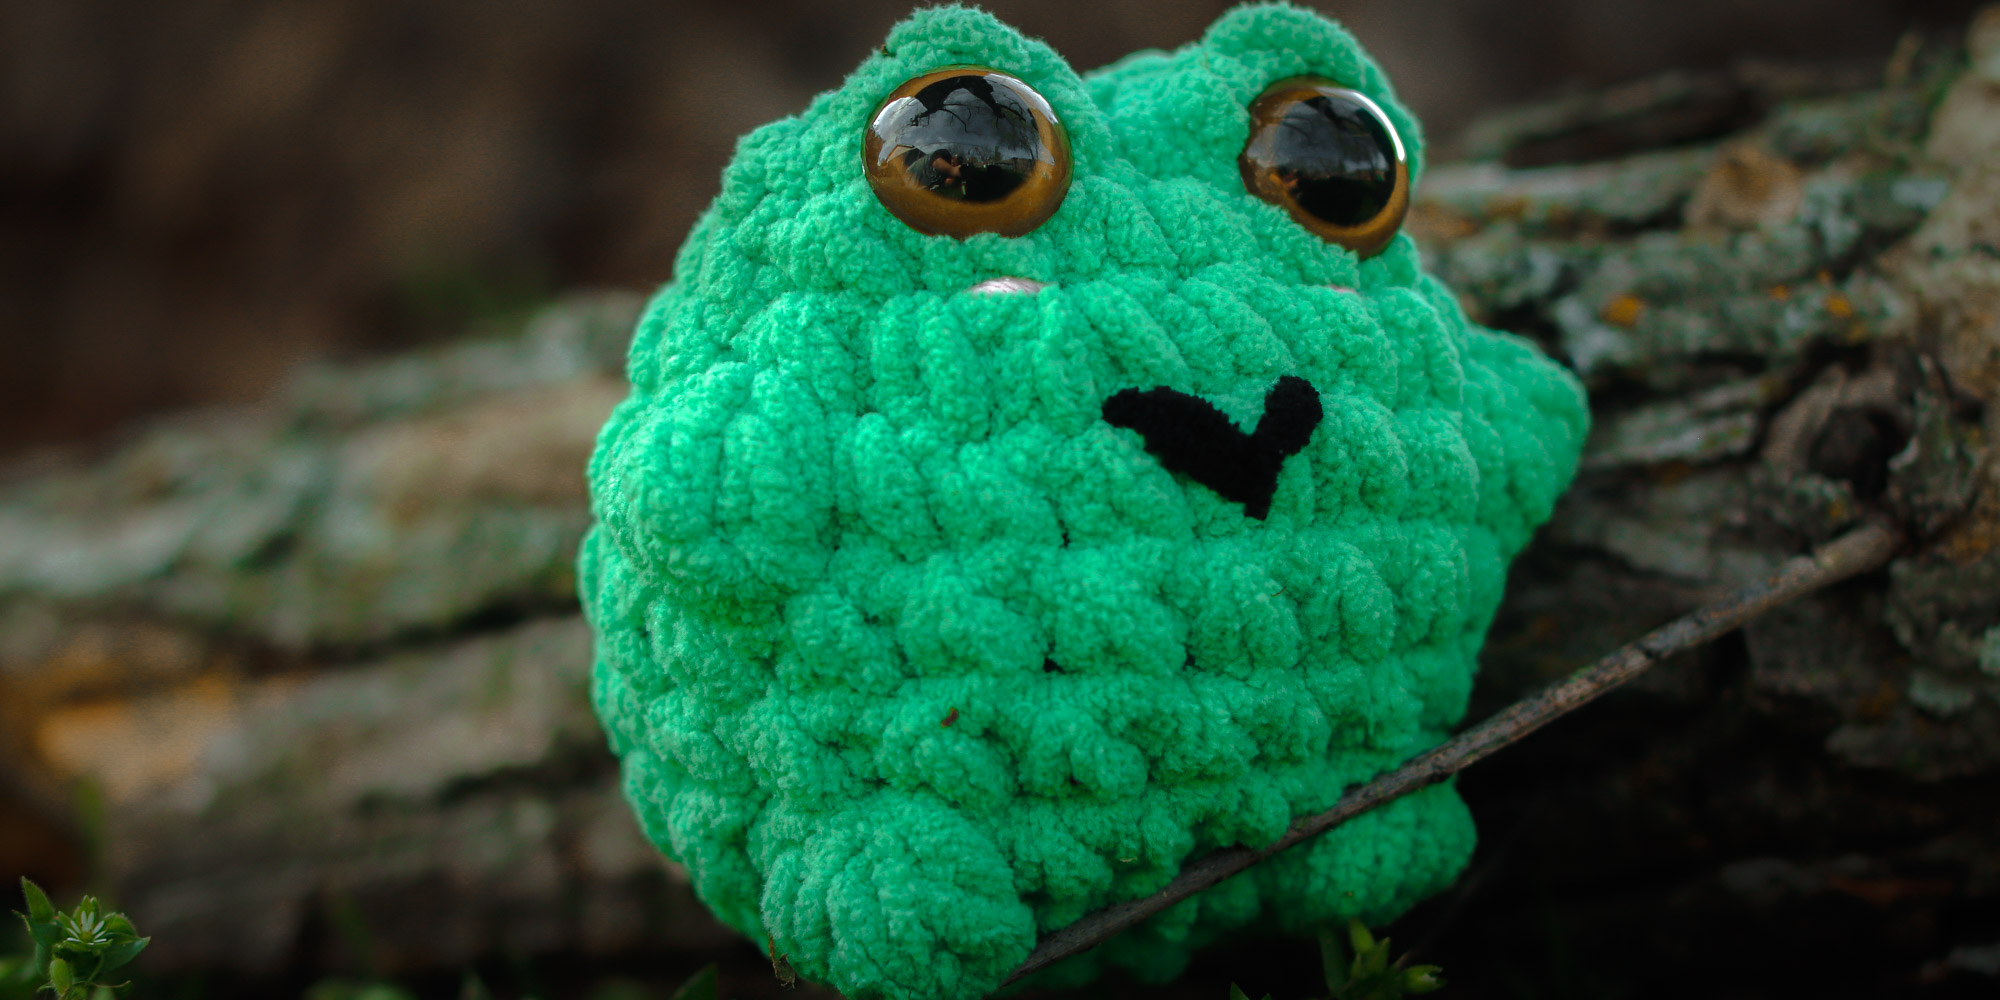 A closer look on this frog confirms a softness in texture  that perfectly encapsulates this brand identity of something strange and unique, yet familiar and comforting.